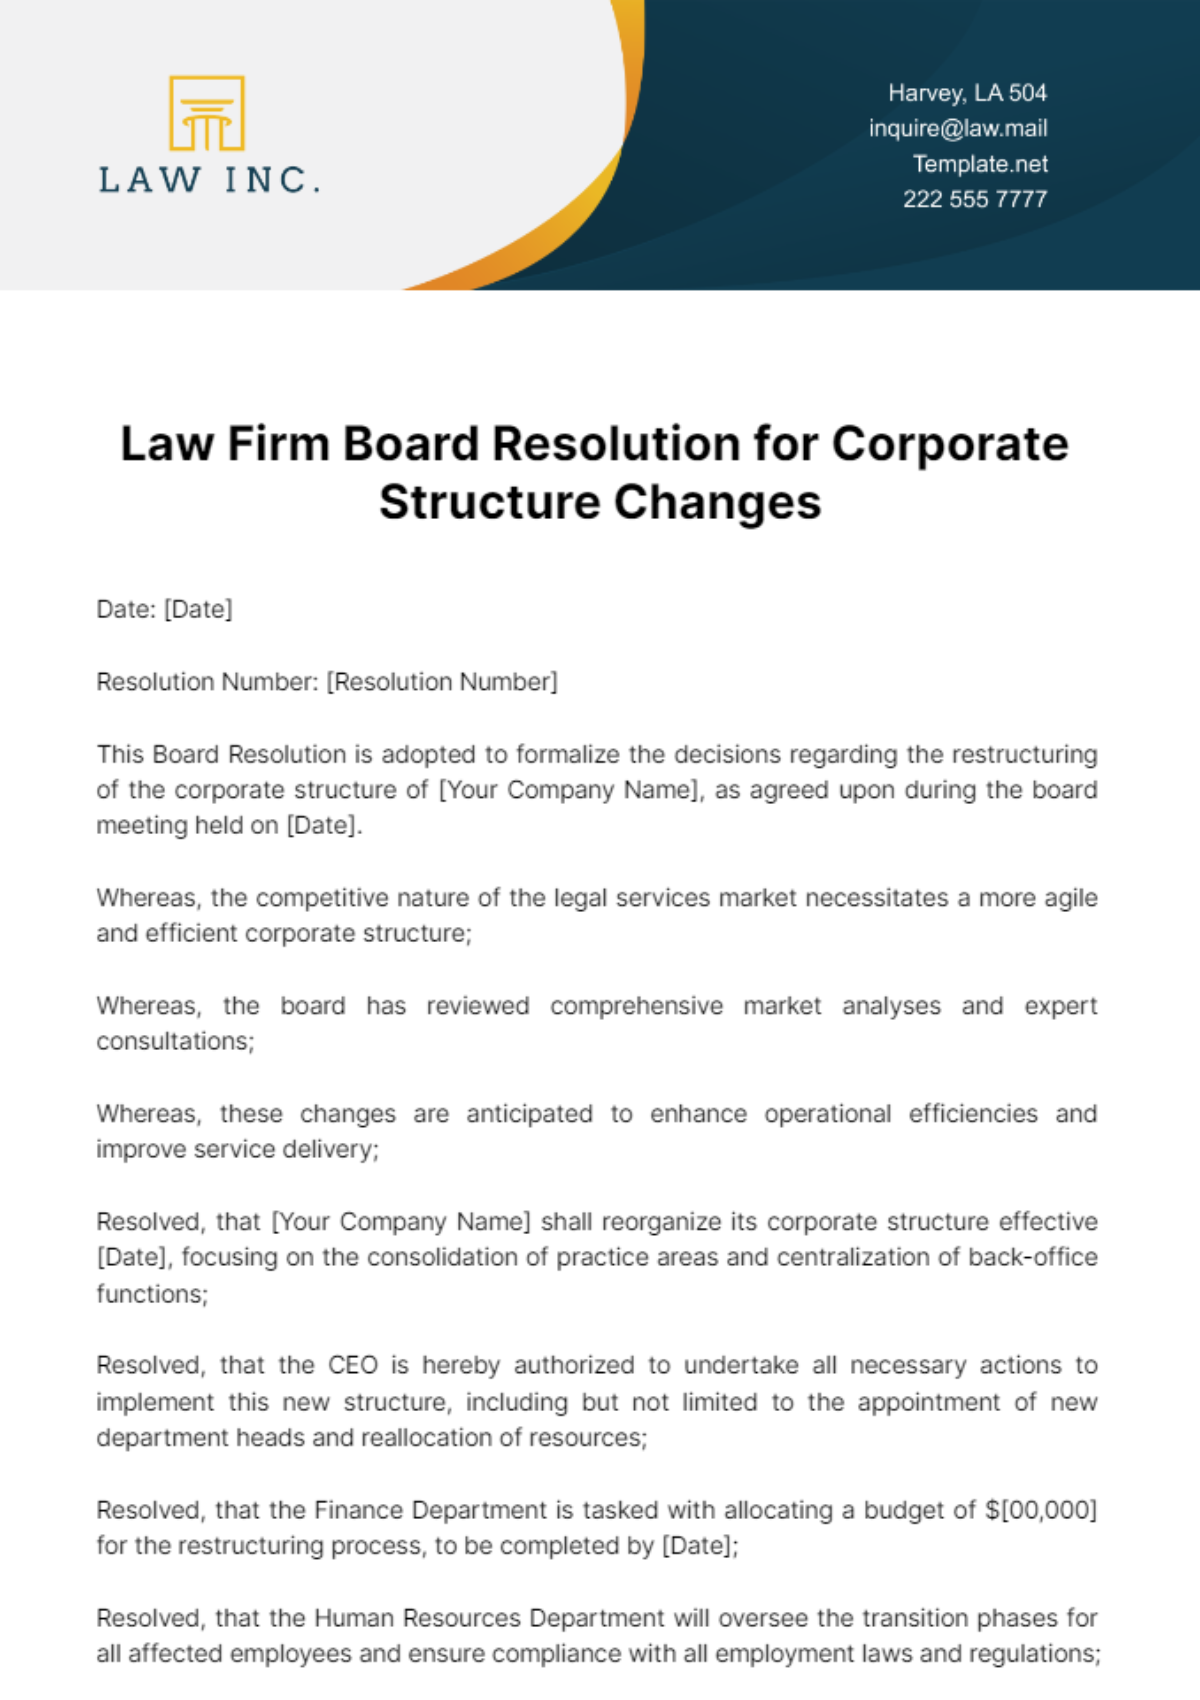 Free Law Firm Board Resolution for Corporate Structure Changes